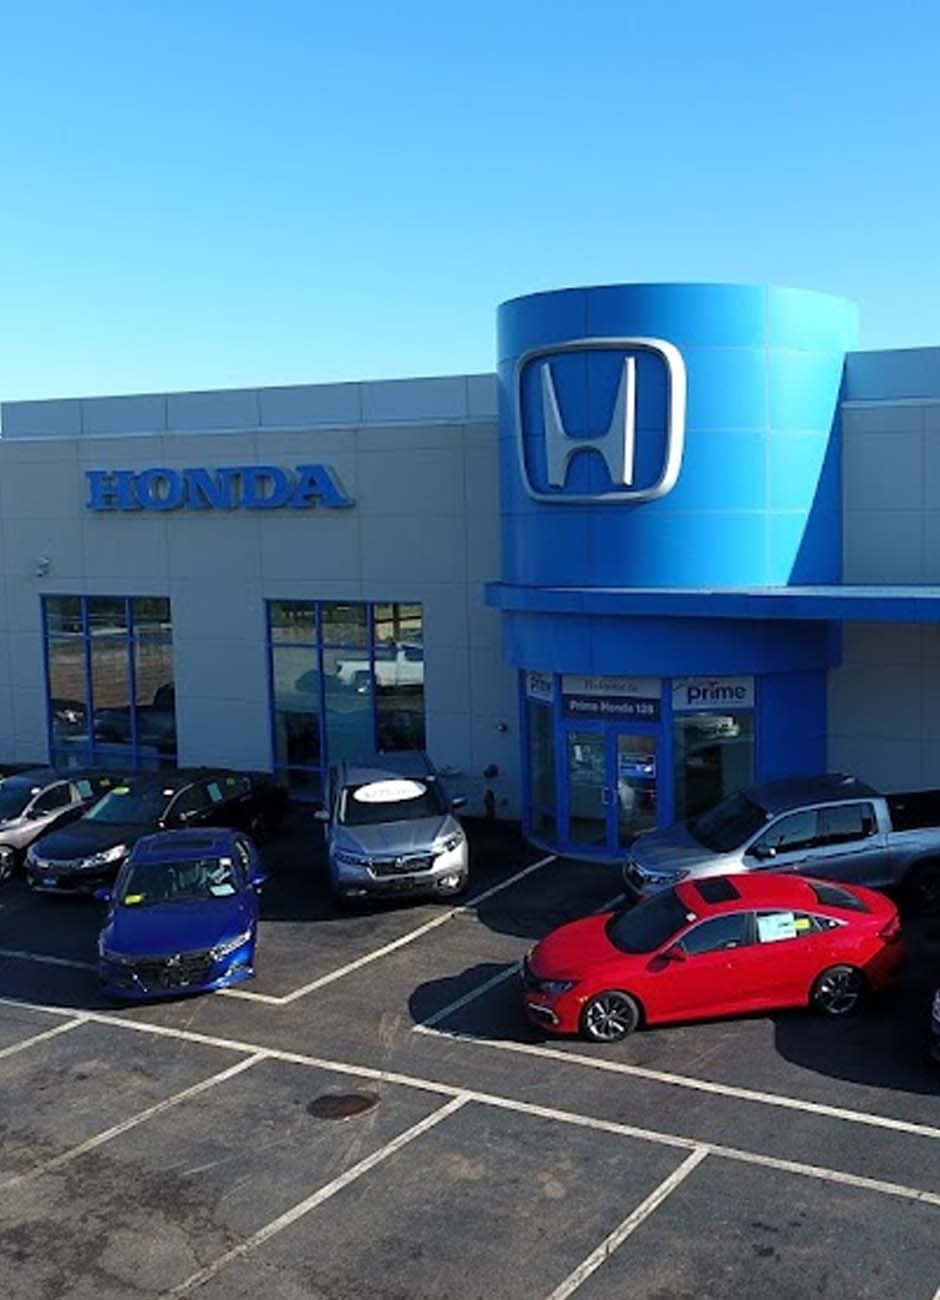 Ira Honda 128 dealership from the outside during the day